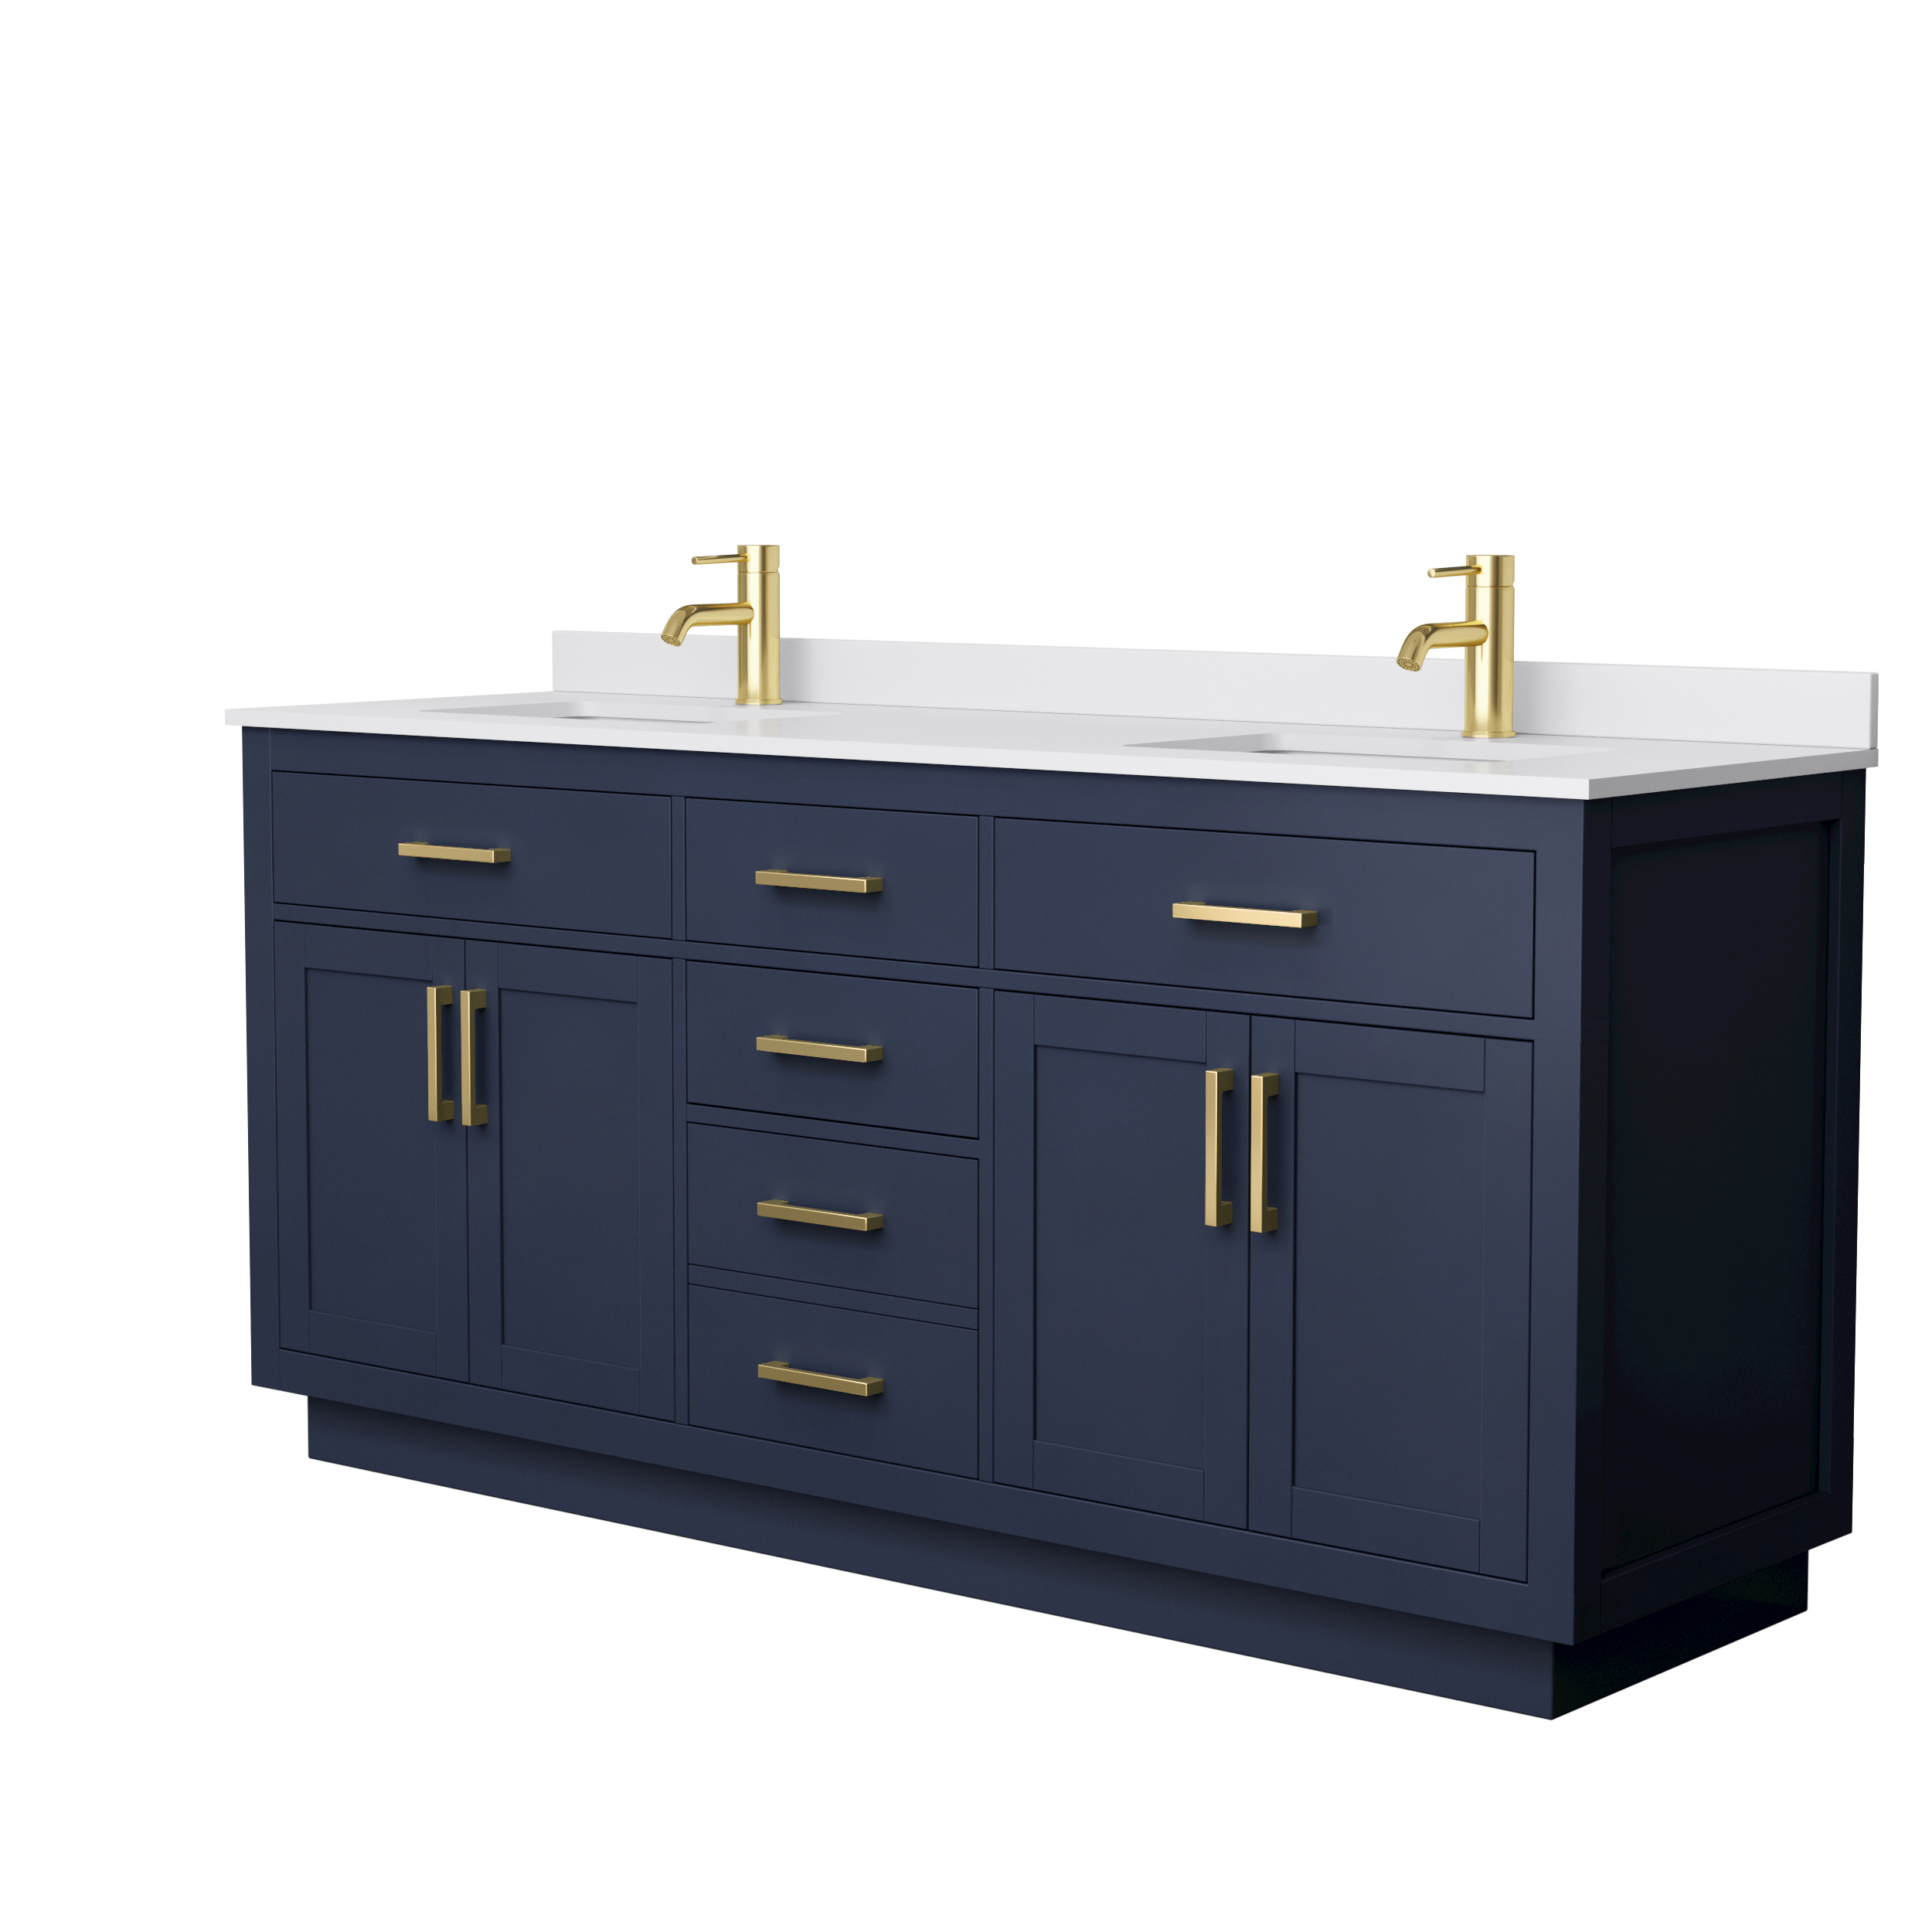 beckett 72" double bathroom vanity with toe kick, cultured marble counter - dark blue